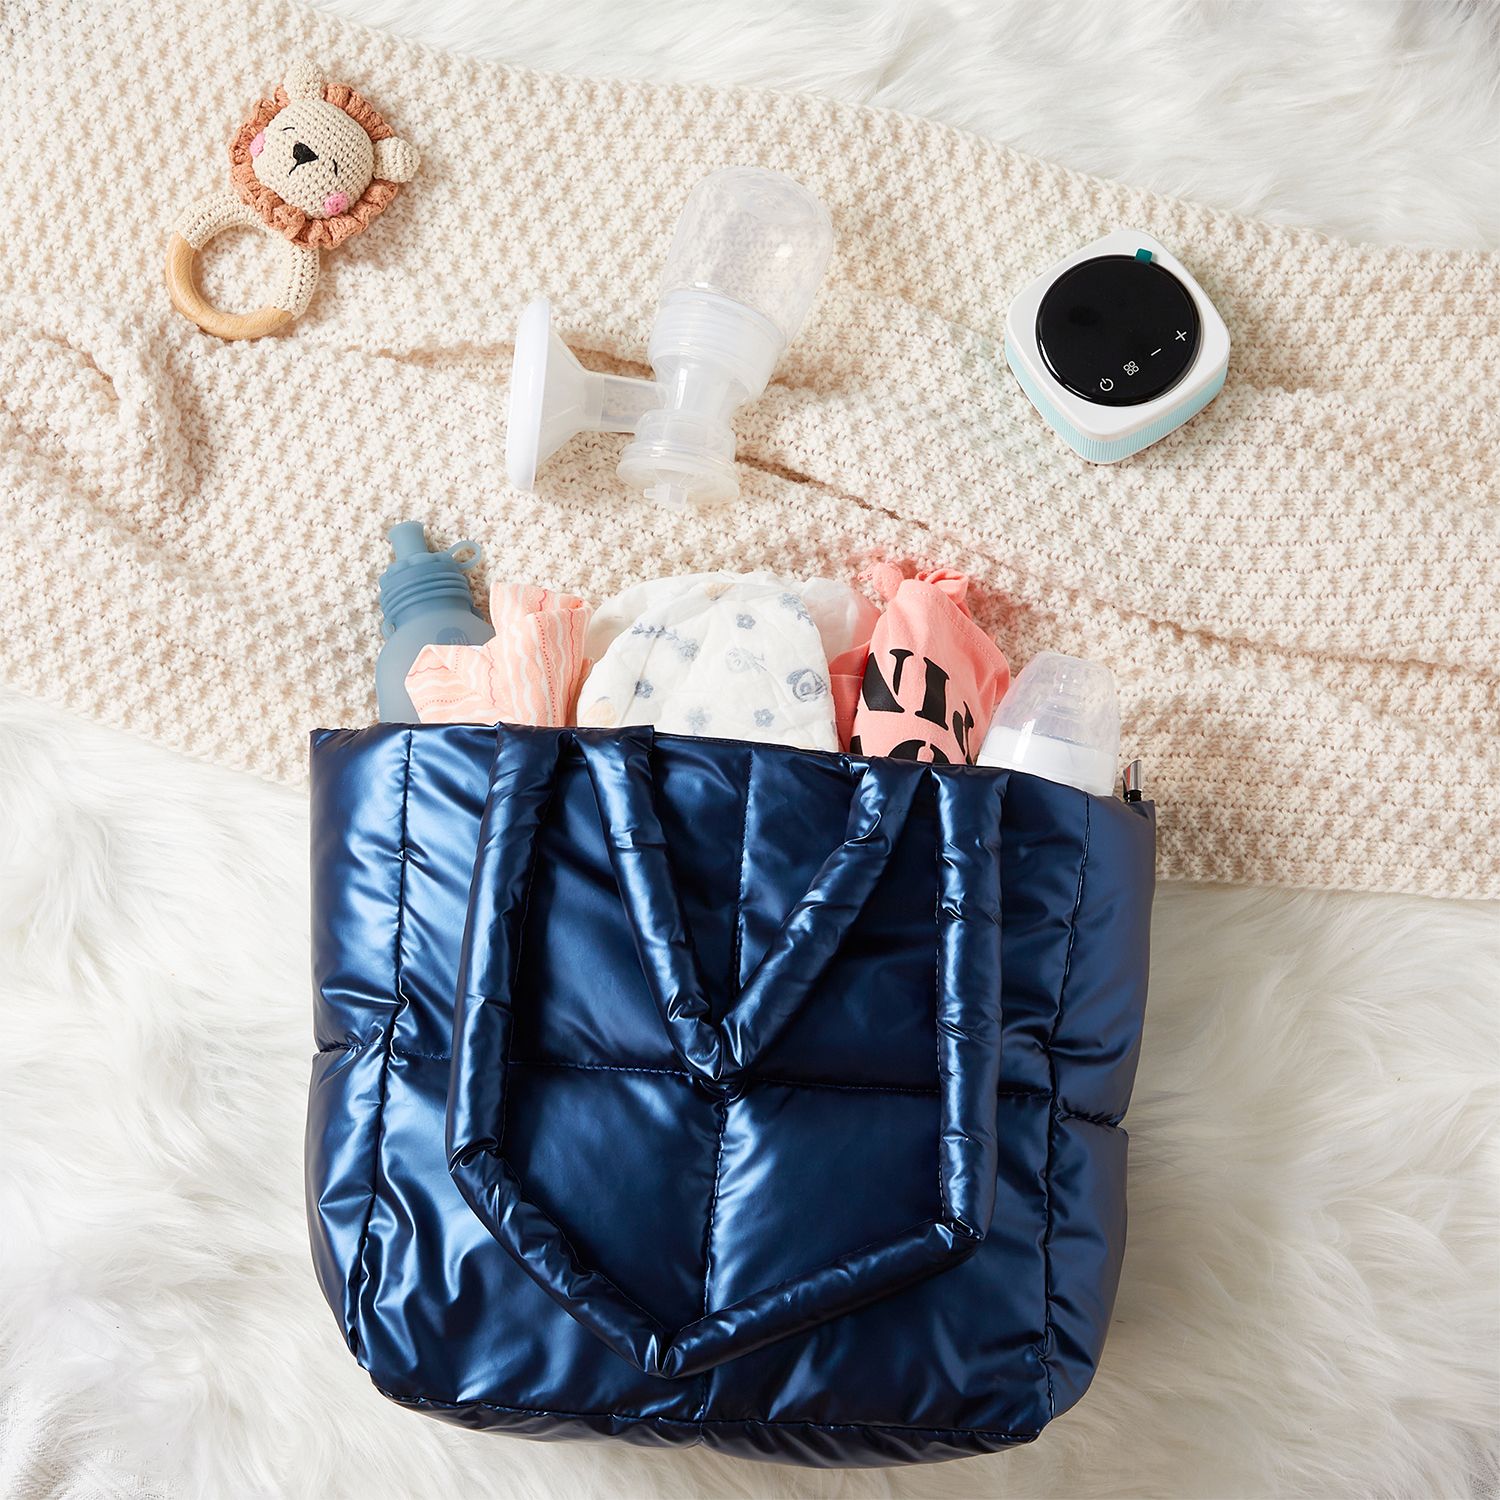 Simple And Stylish Fall/Winter Baby Bag With Contrasting Colors